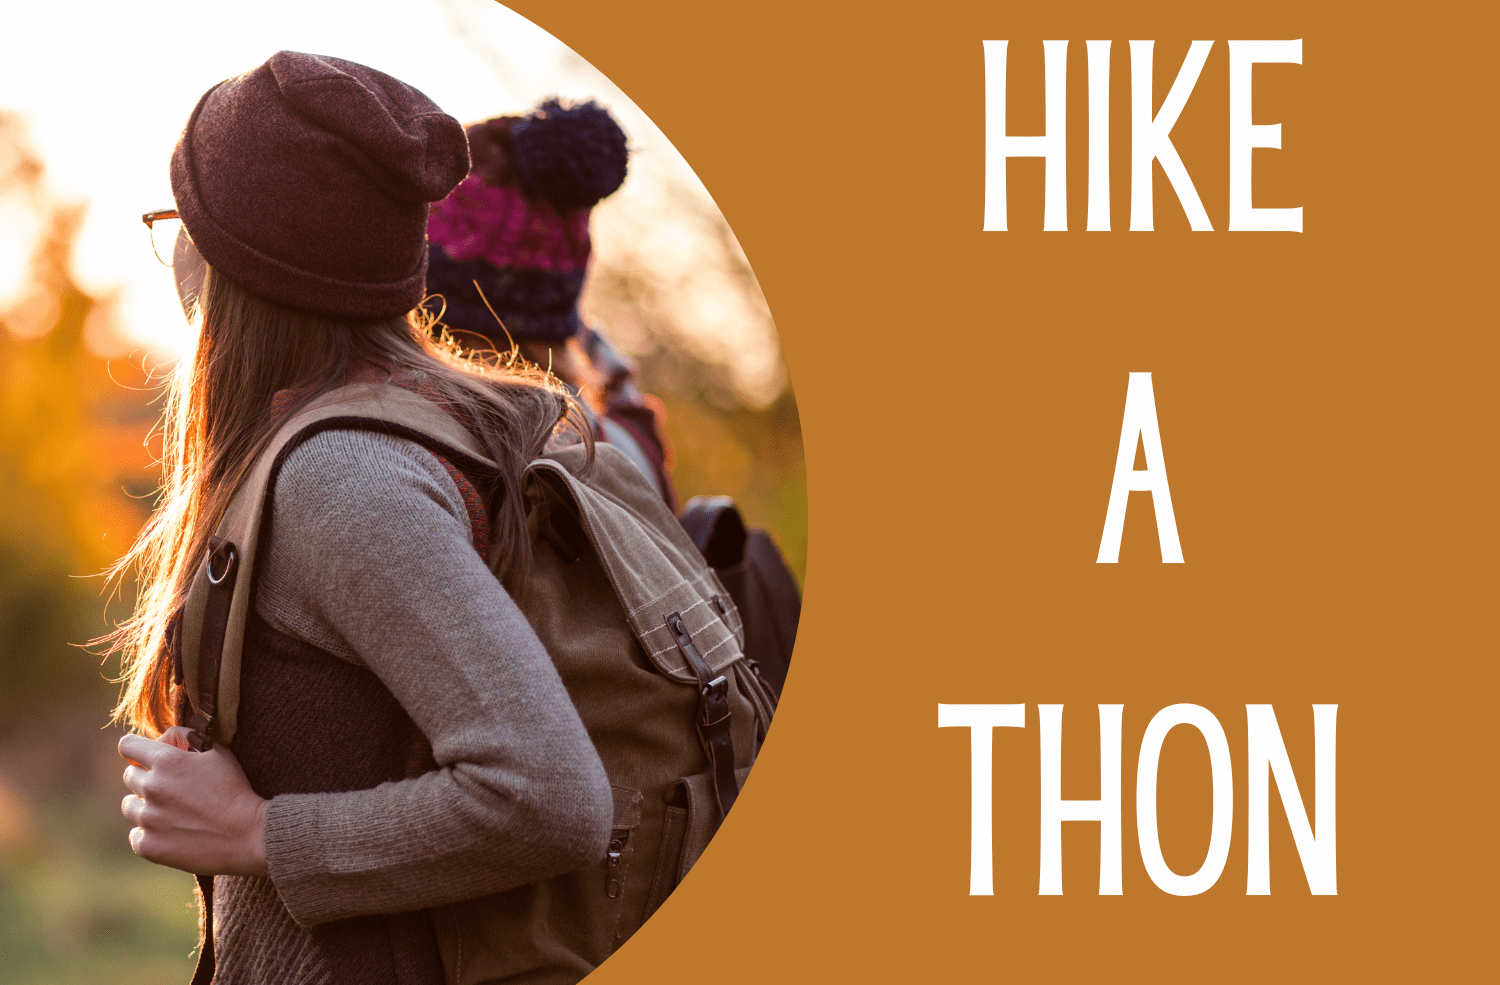 Hike-a-thon Registration Open